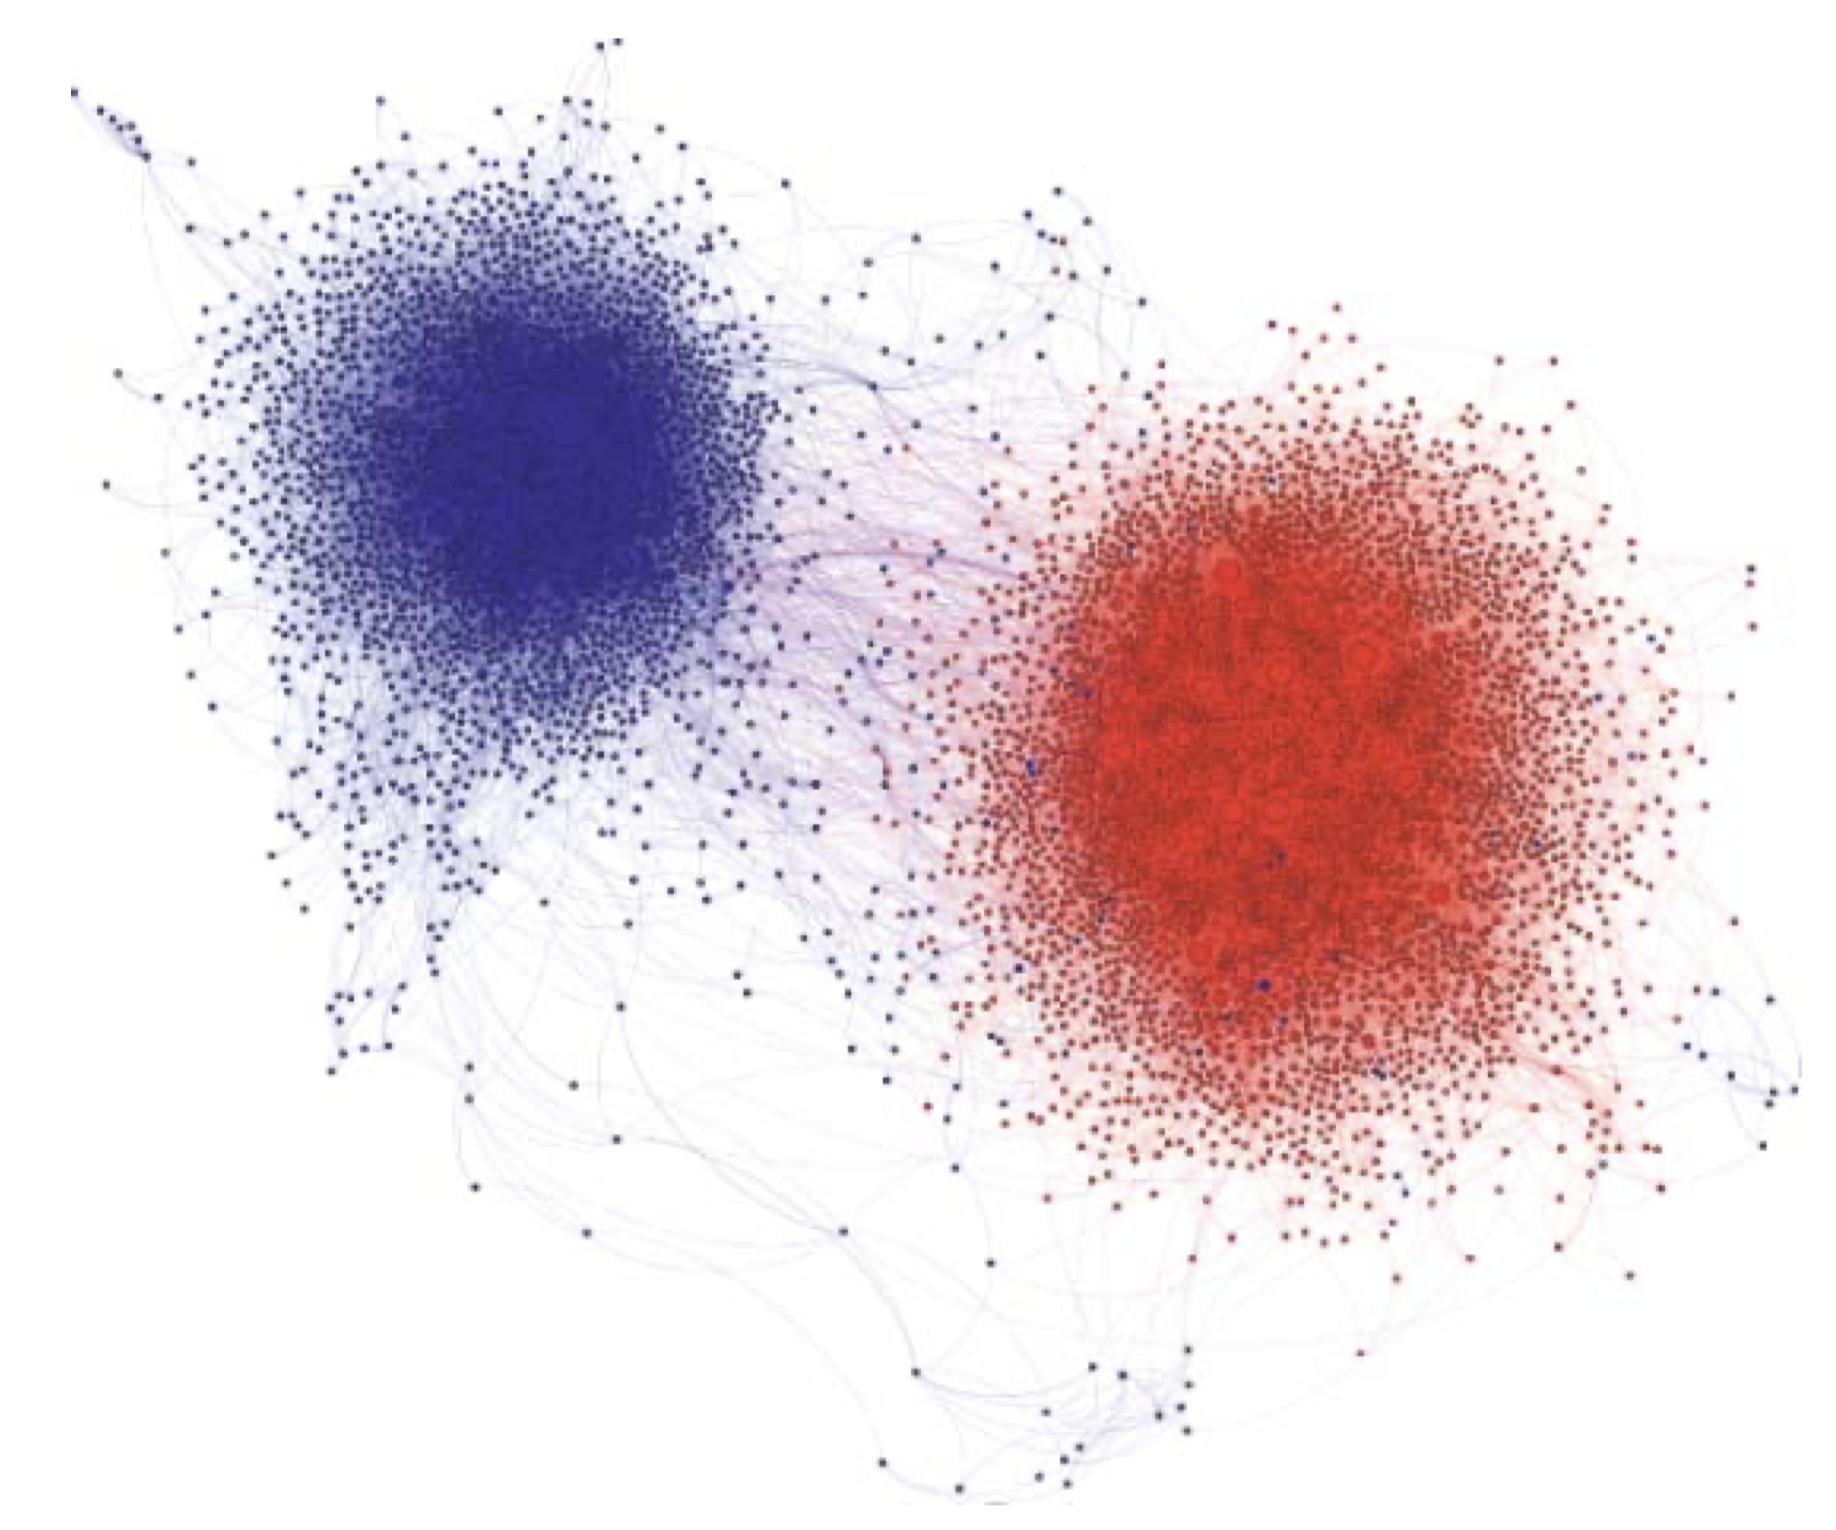 A retweet network on Twitter, among people sharing posts about US politics. Links represent retweets of posts that used hashtags such as #tcot and #p2, associated with conservative (red) and progressive (blue) messages, respectively, around the 2010 US midterm election. When Bob retweets Alice, we draw a direct link from Alice to Bob to indicate that a message has been propagated from her to him. The direction of the links is not shown.